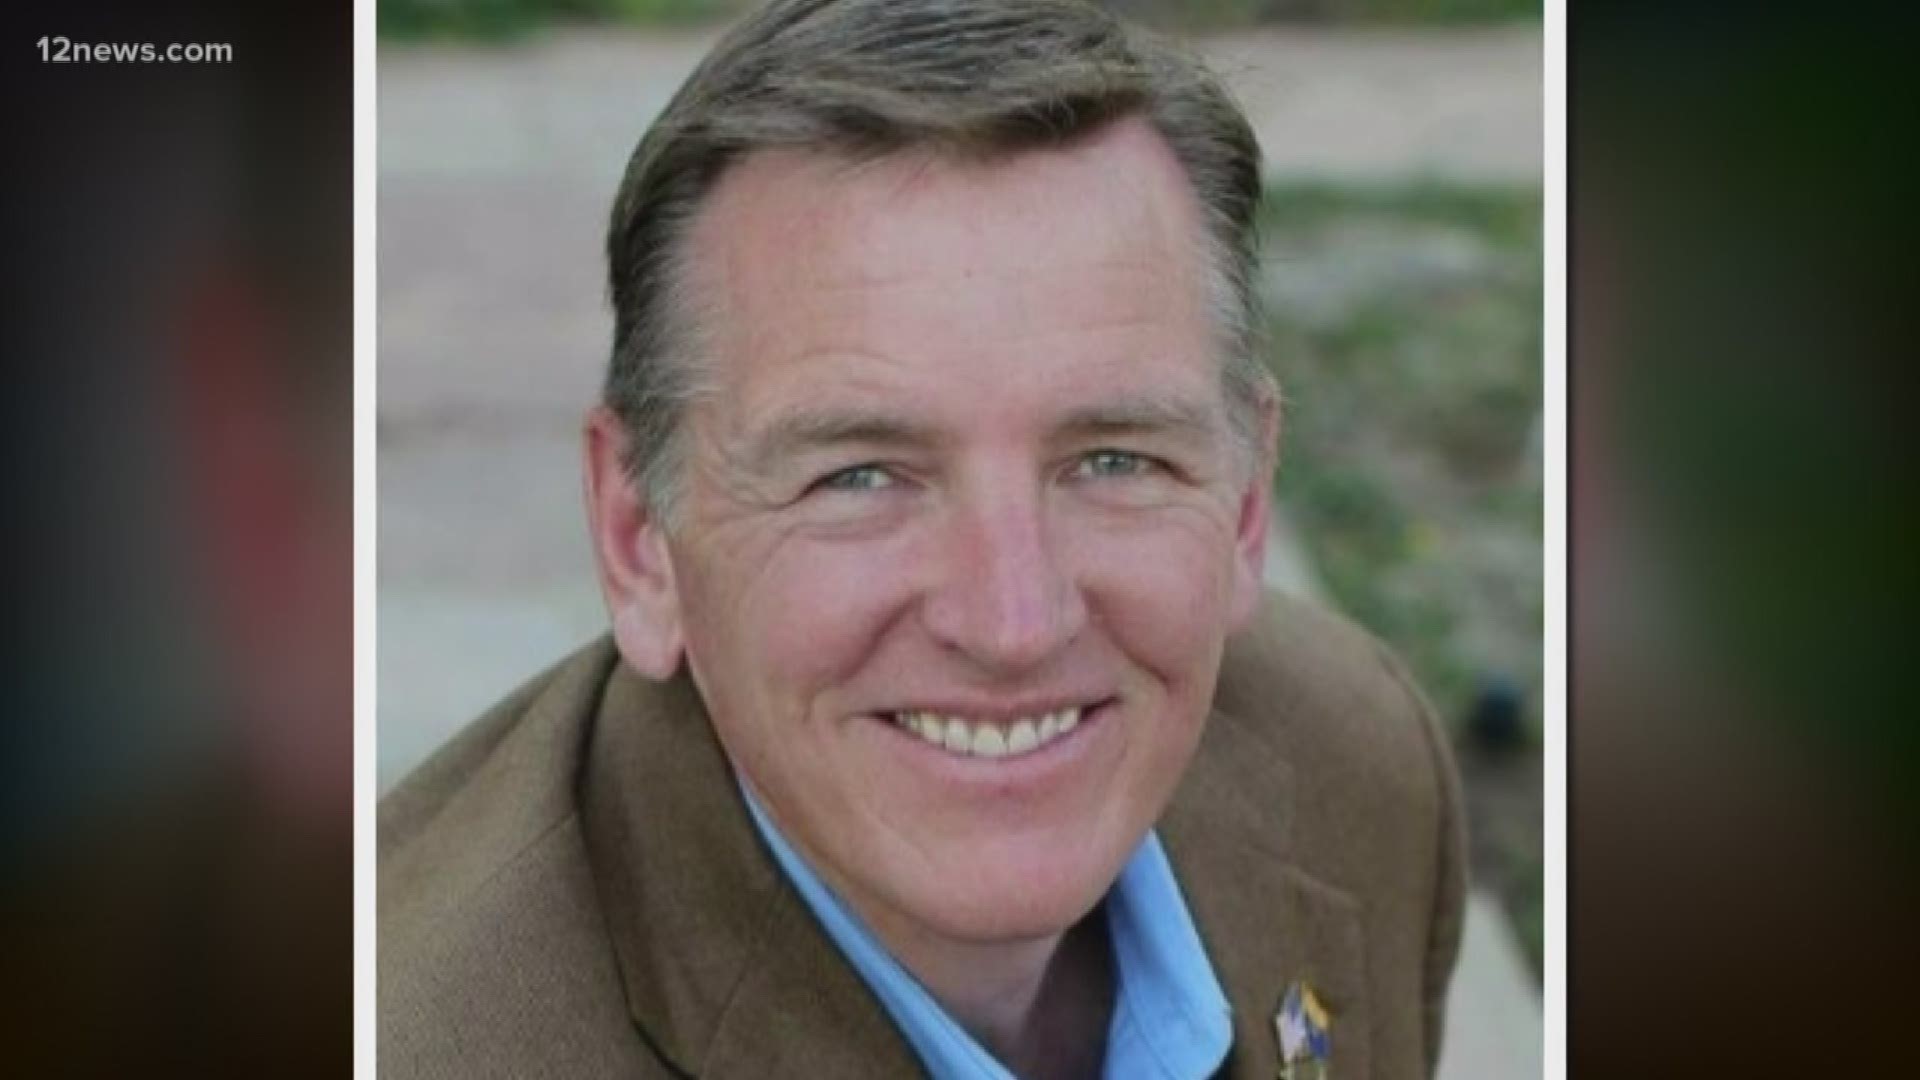 Arizona Congressman Paul Gosar announced he placed himself in voluntary quarantine after coming into contact with someone with coronavirus.